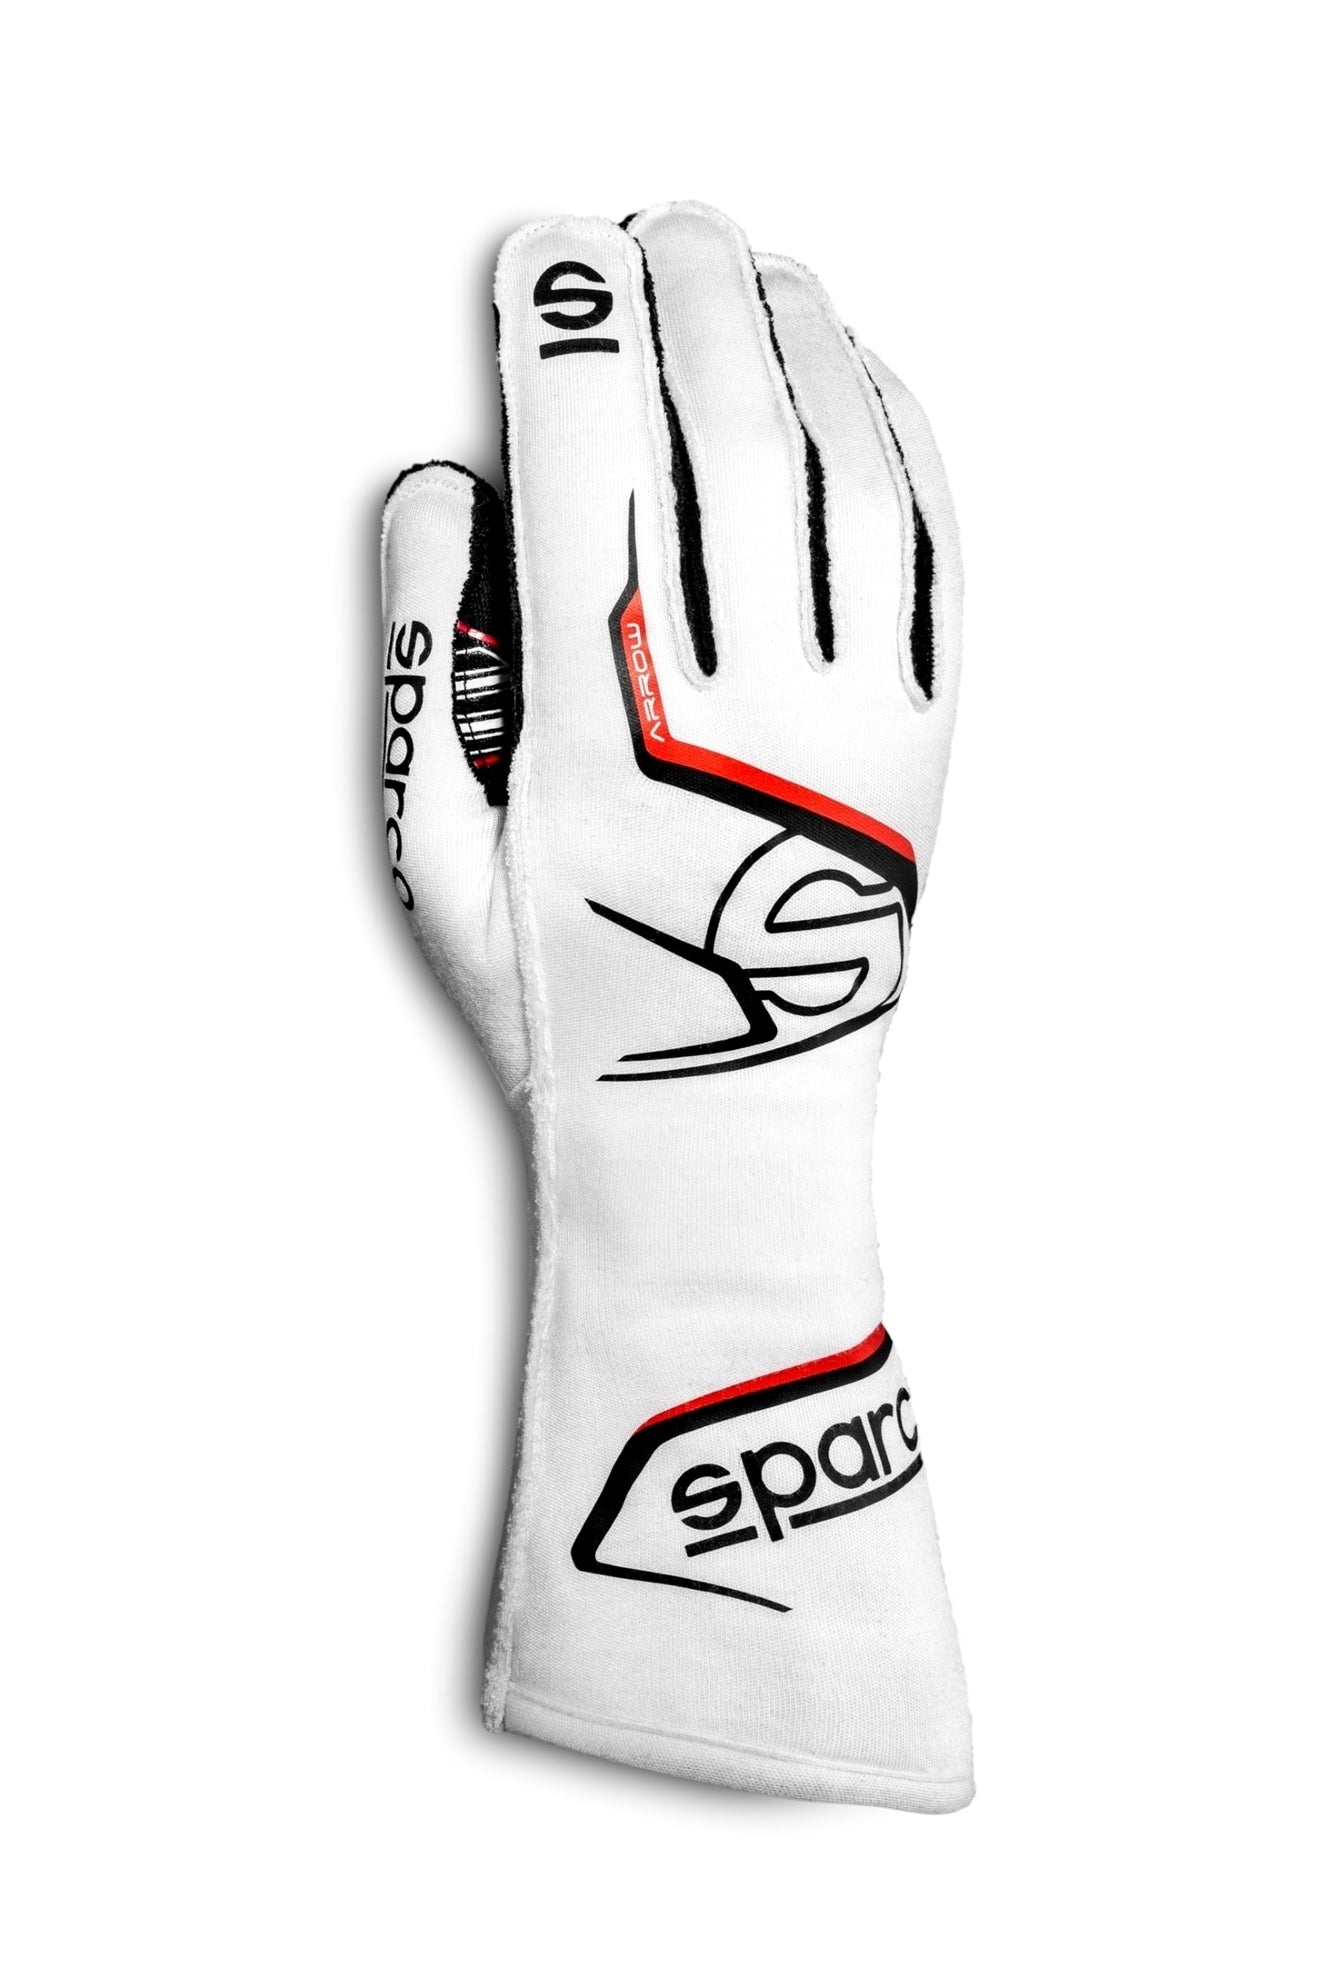 Gloves Sparco Meca 3 size 12 (XL) red